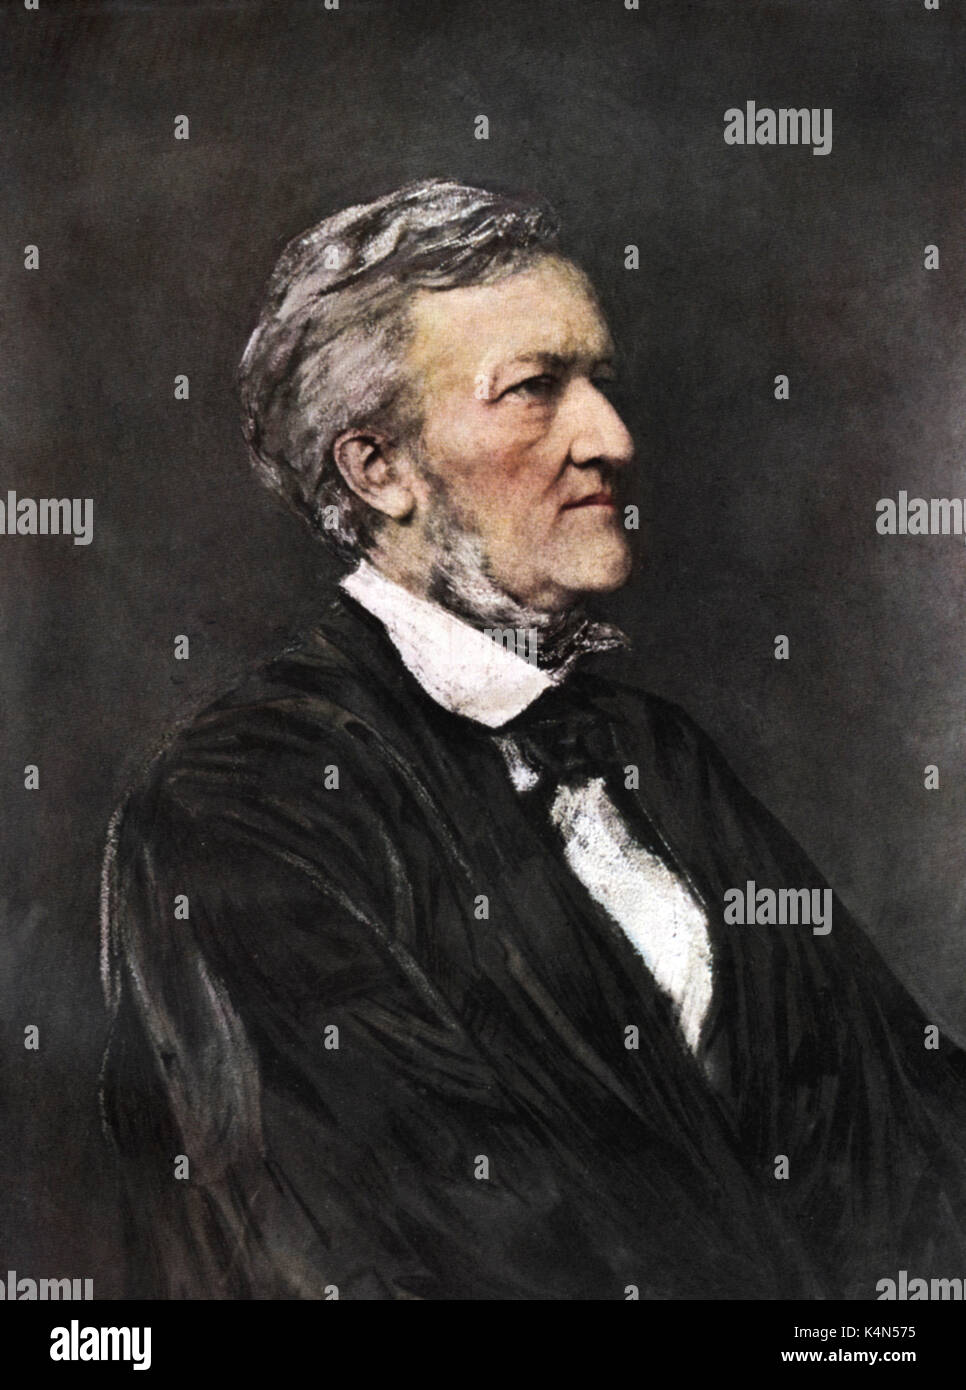 Richard Wagner - illustration by Hubert Herkomer, 1877 German composer & author, 22 May 1813 - 13 February 1883. Stock Photo